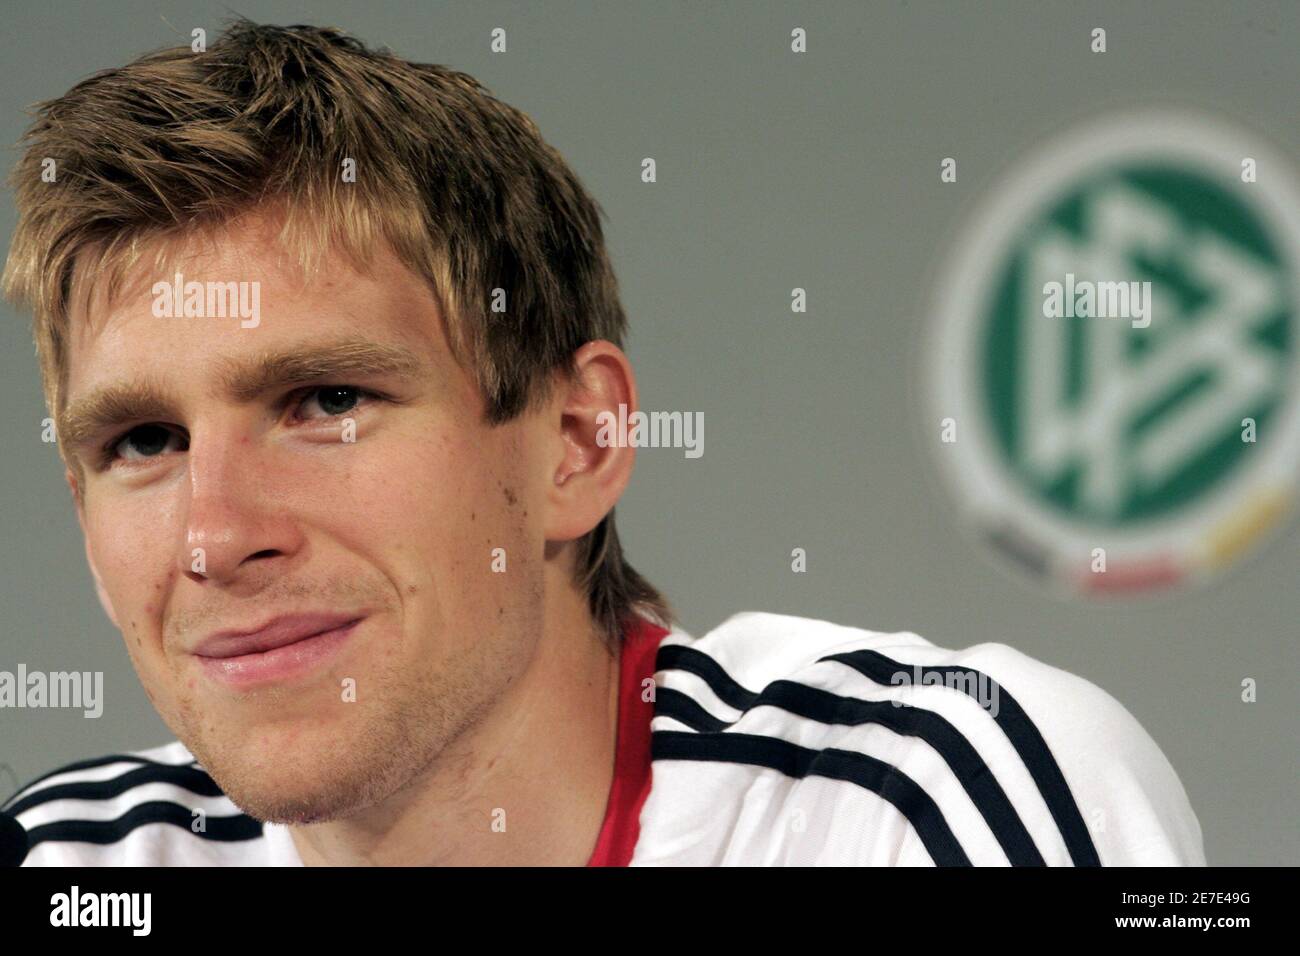 German player Per Mertesacker addresses a news conference in Berlin June 15, 2006. [The German national team won a Group A match of the soccer World Cup against Poland on Wednesday in Dortmund 1-0.] Stock Photo